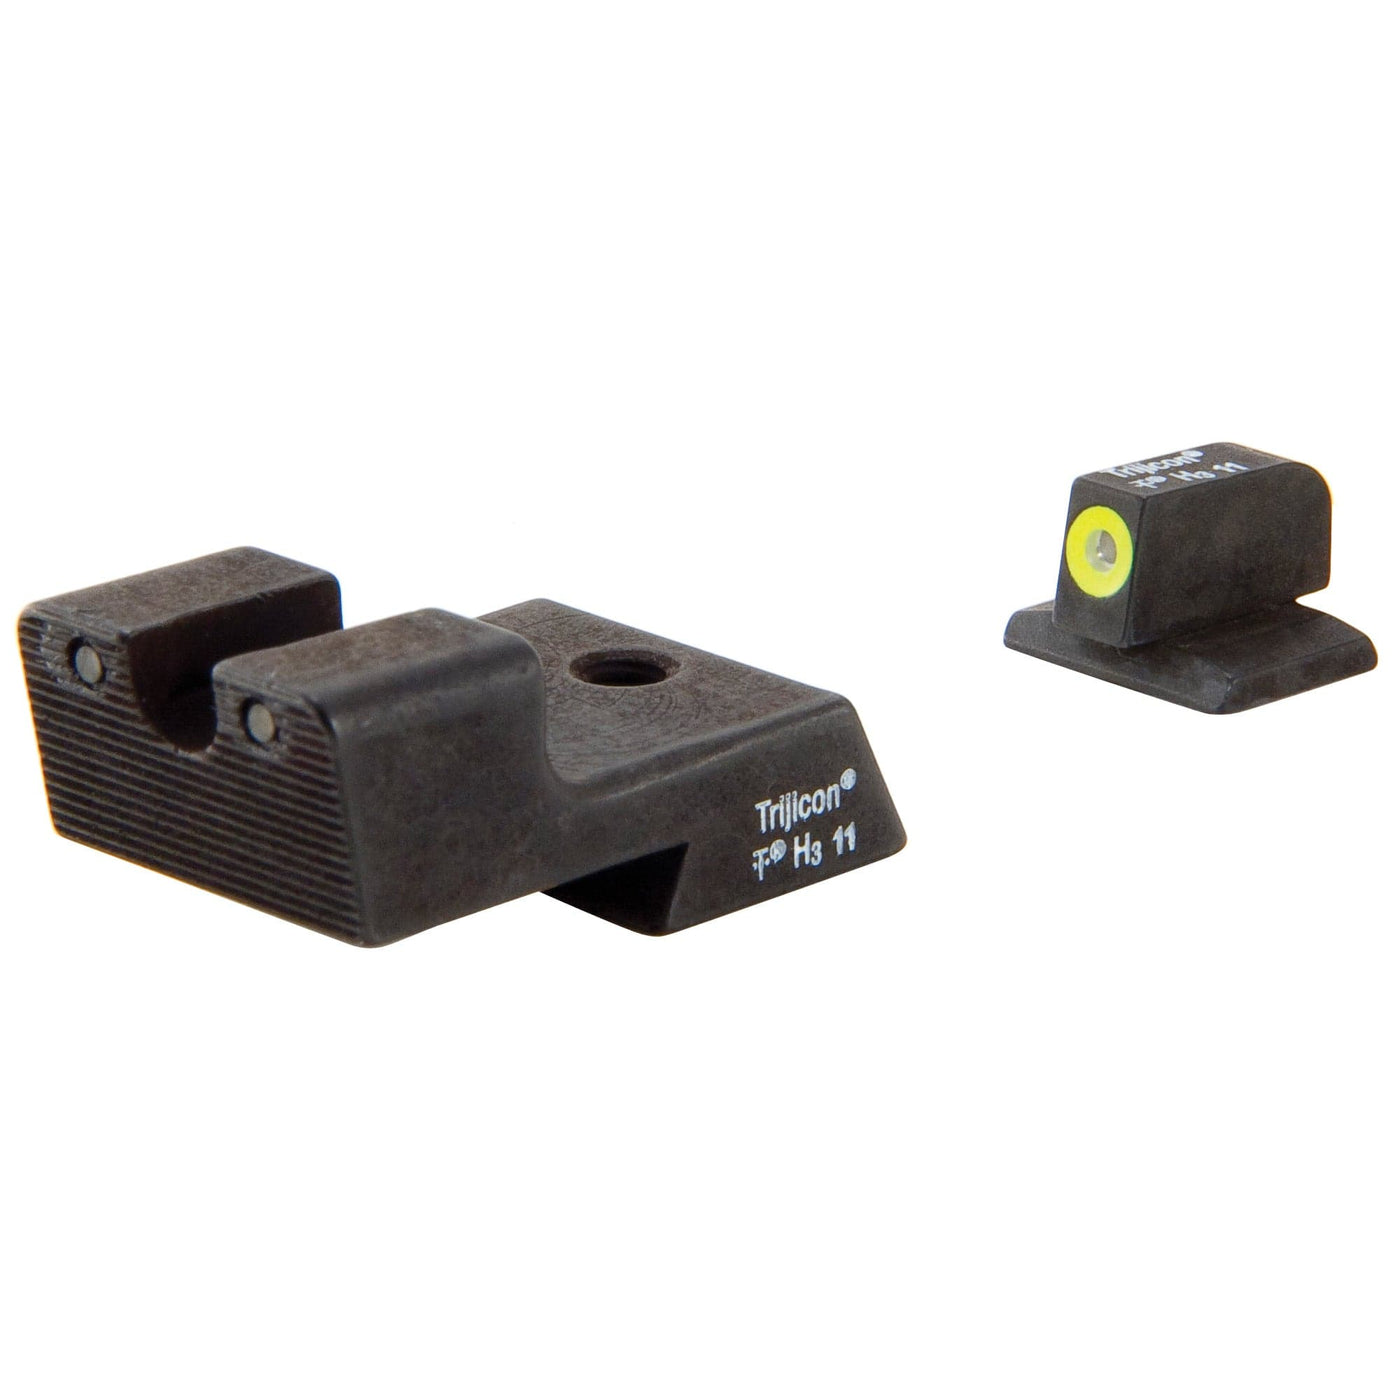 Trijicon Trijicon Hd Ns Colt 1911 Ylw Front Sights/Lasers/Lights